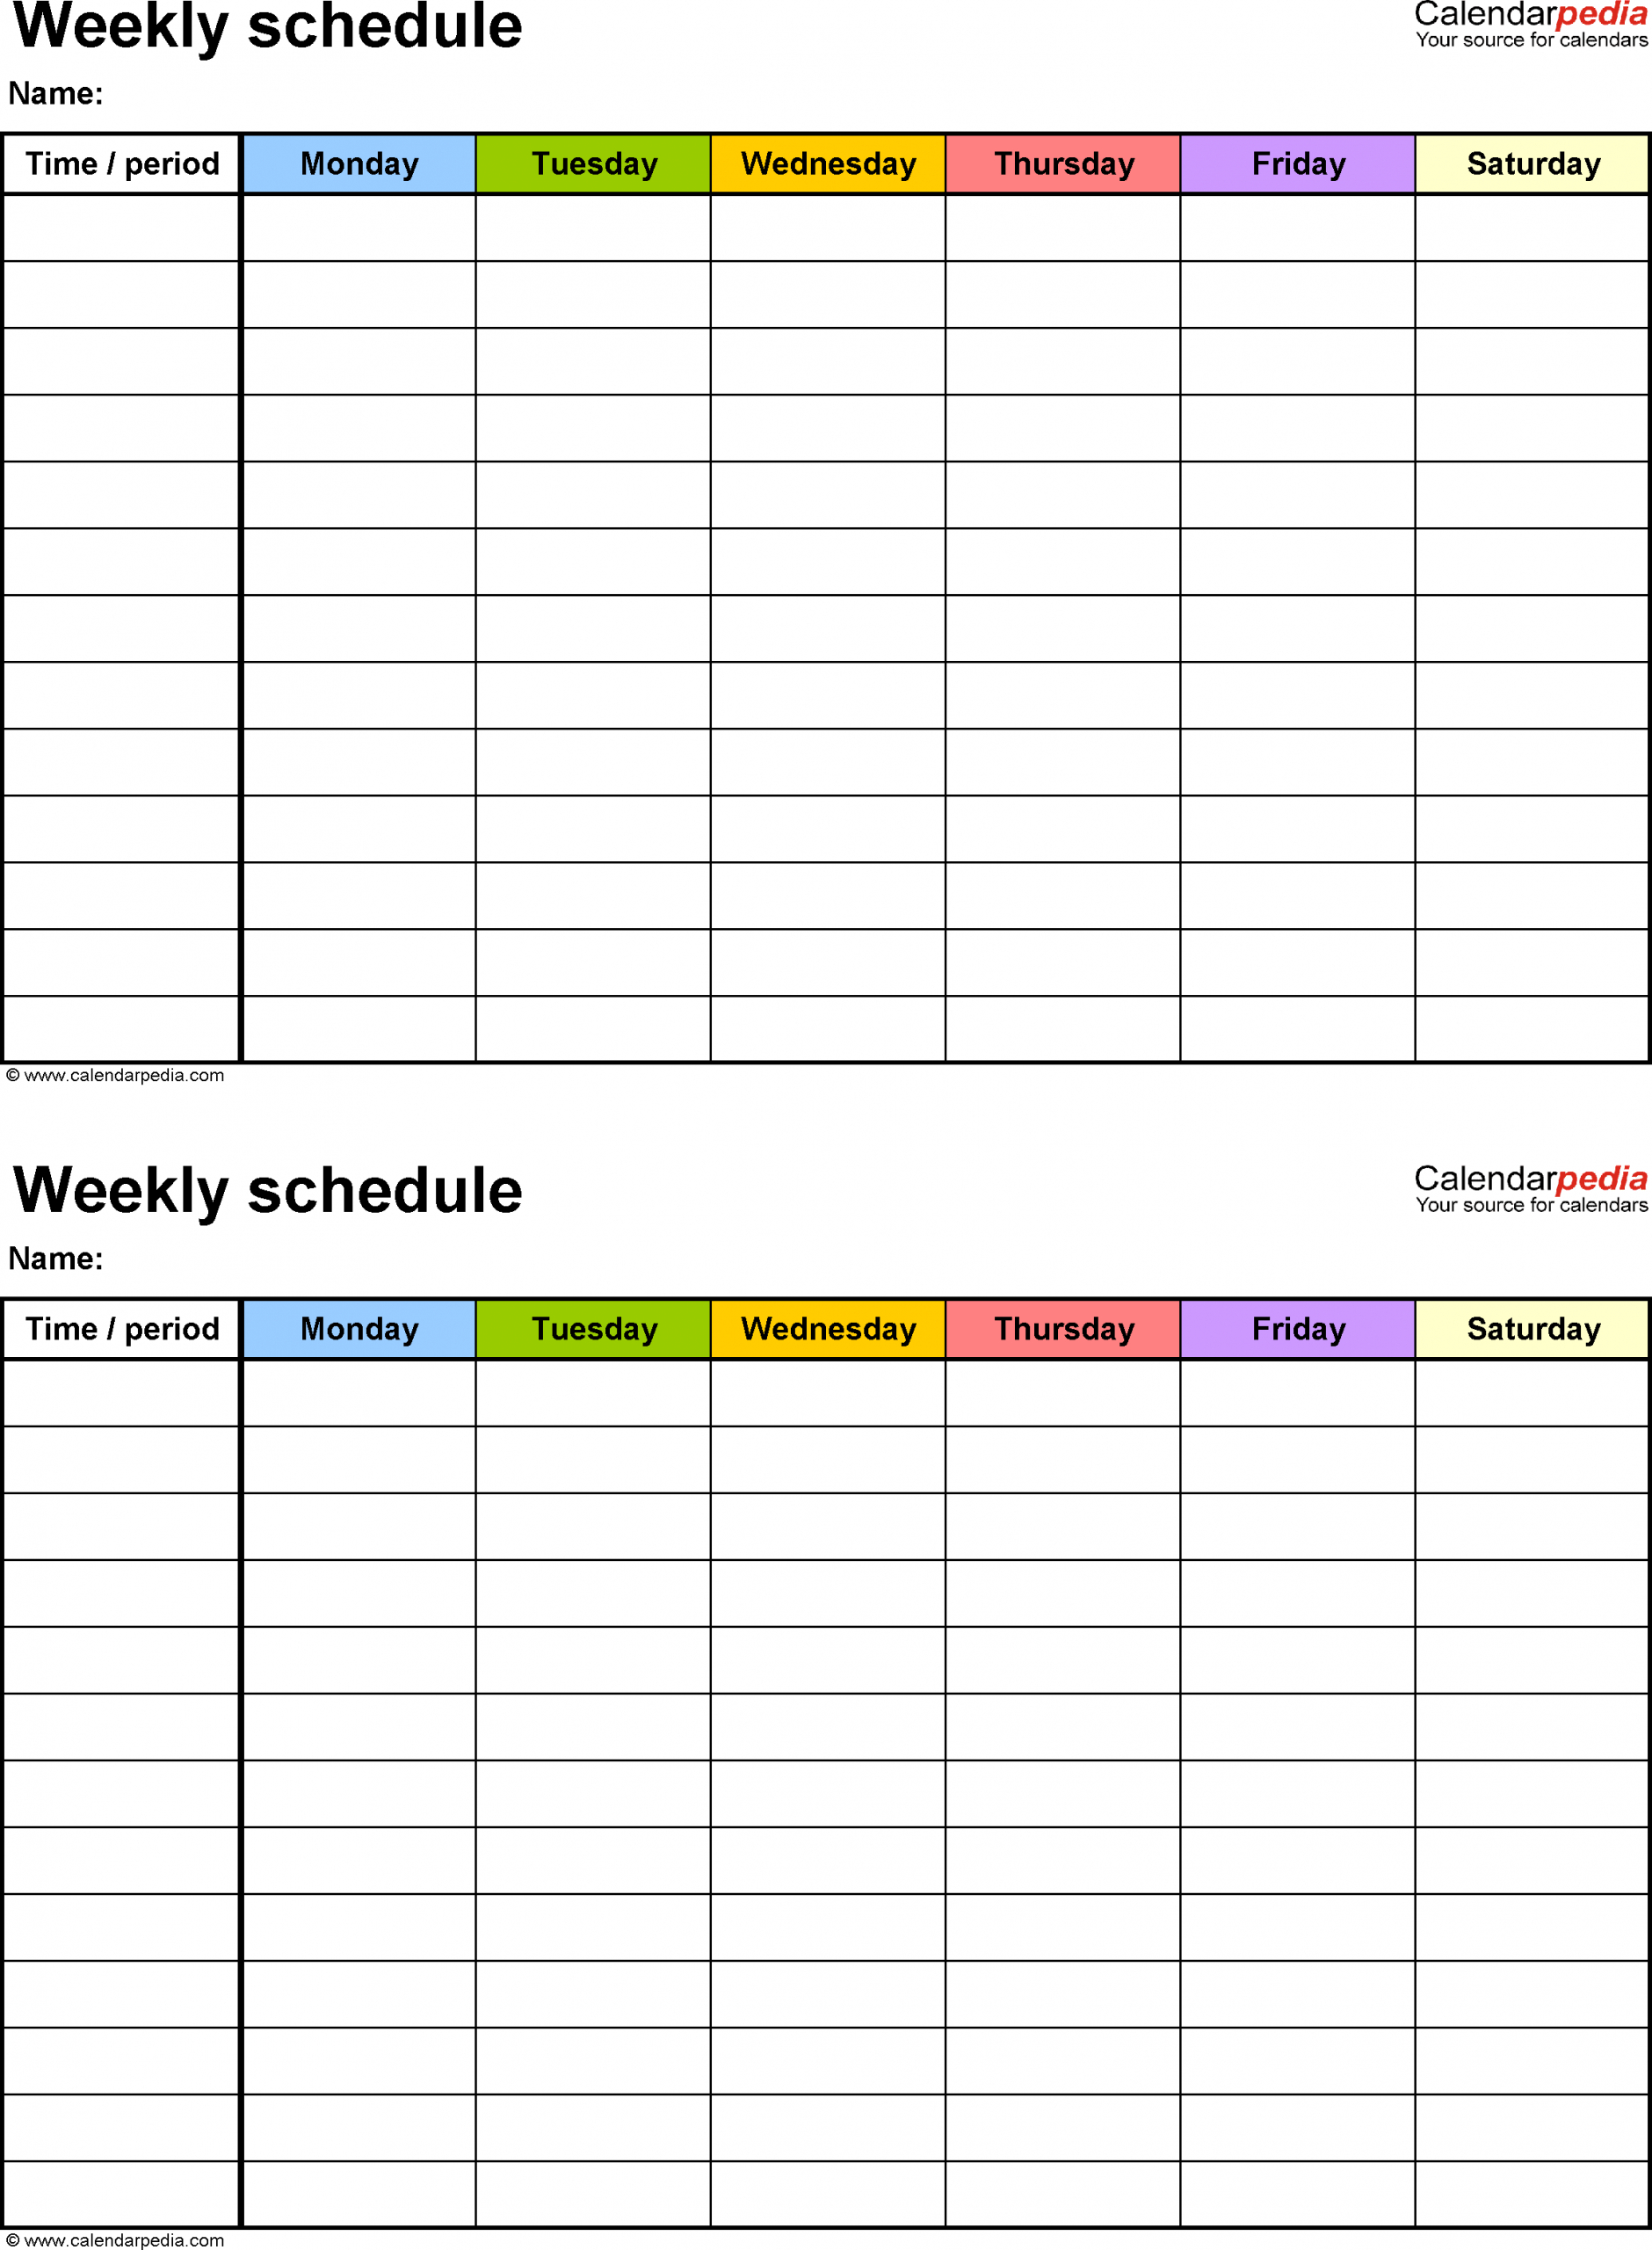 Free Weekly Schedule Templates For Excel Employee for Free Weekly Schedule